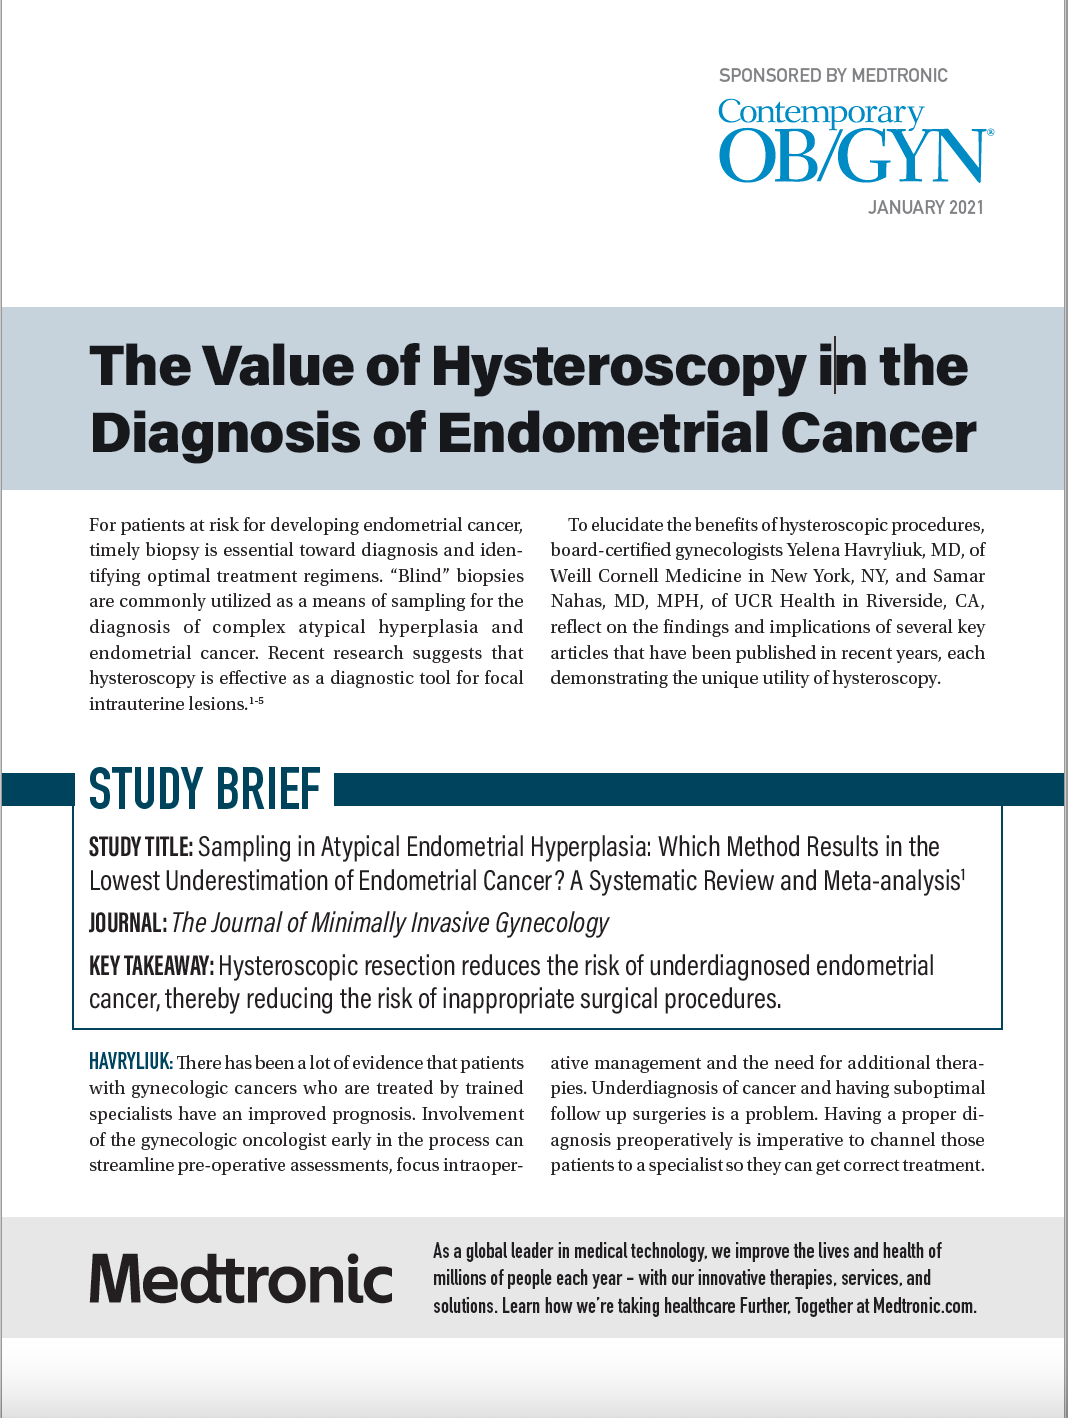 The Value of Hysteroscopy in the Diagnosis of Endometrial Cancer